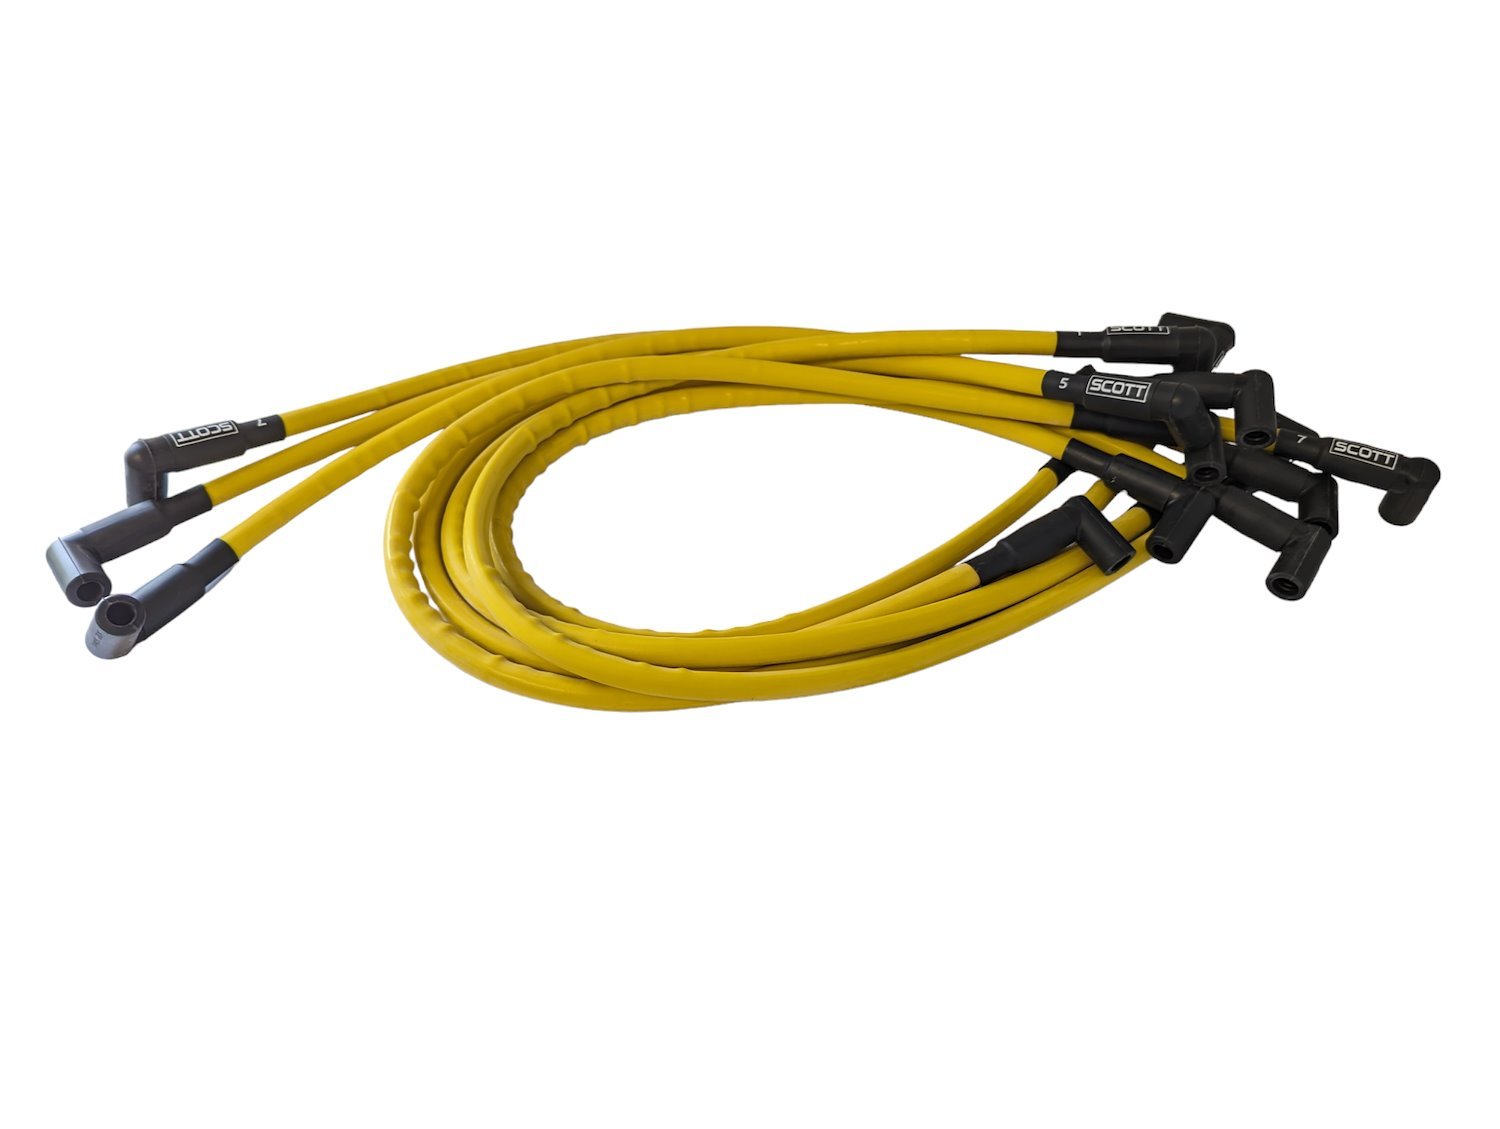 SPW300-CH-416-7 Super Mag Fiberglass-Oversleeved Spark Plug Wire Set for Big Block Chevy, Under Header [Yellow]